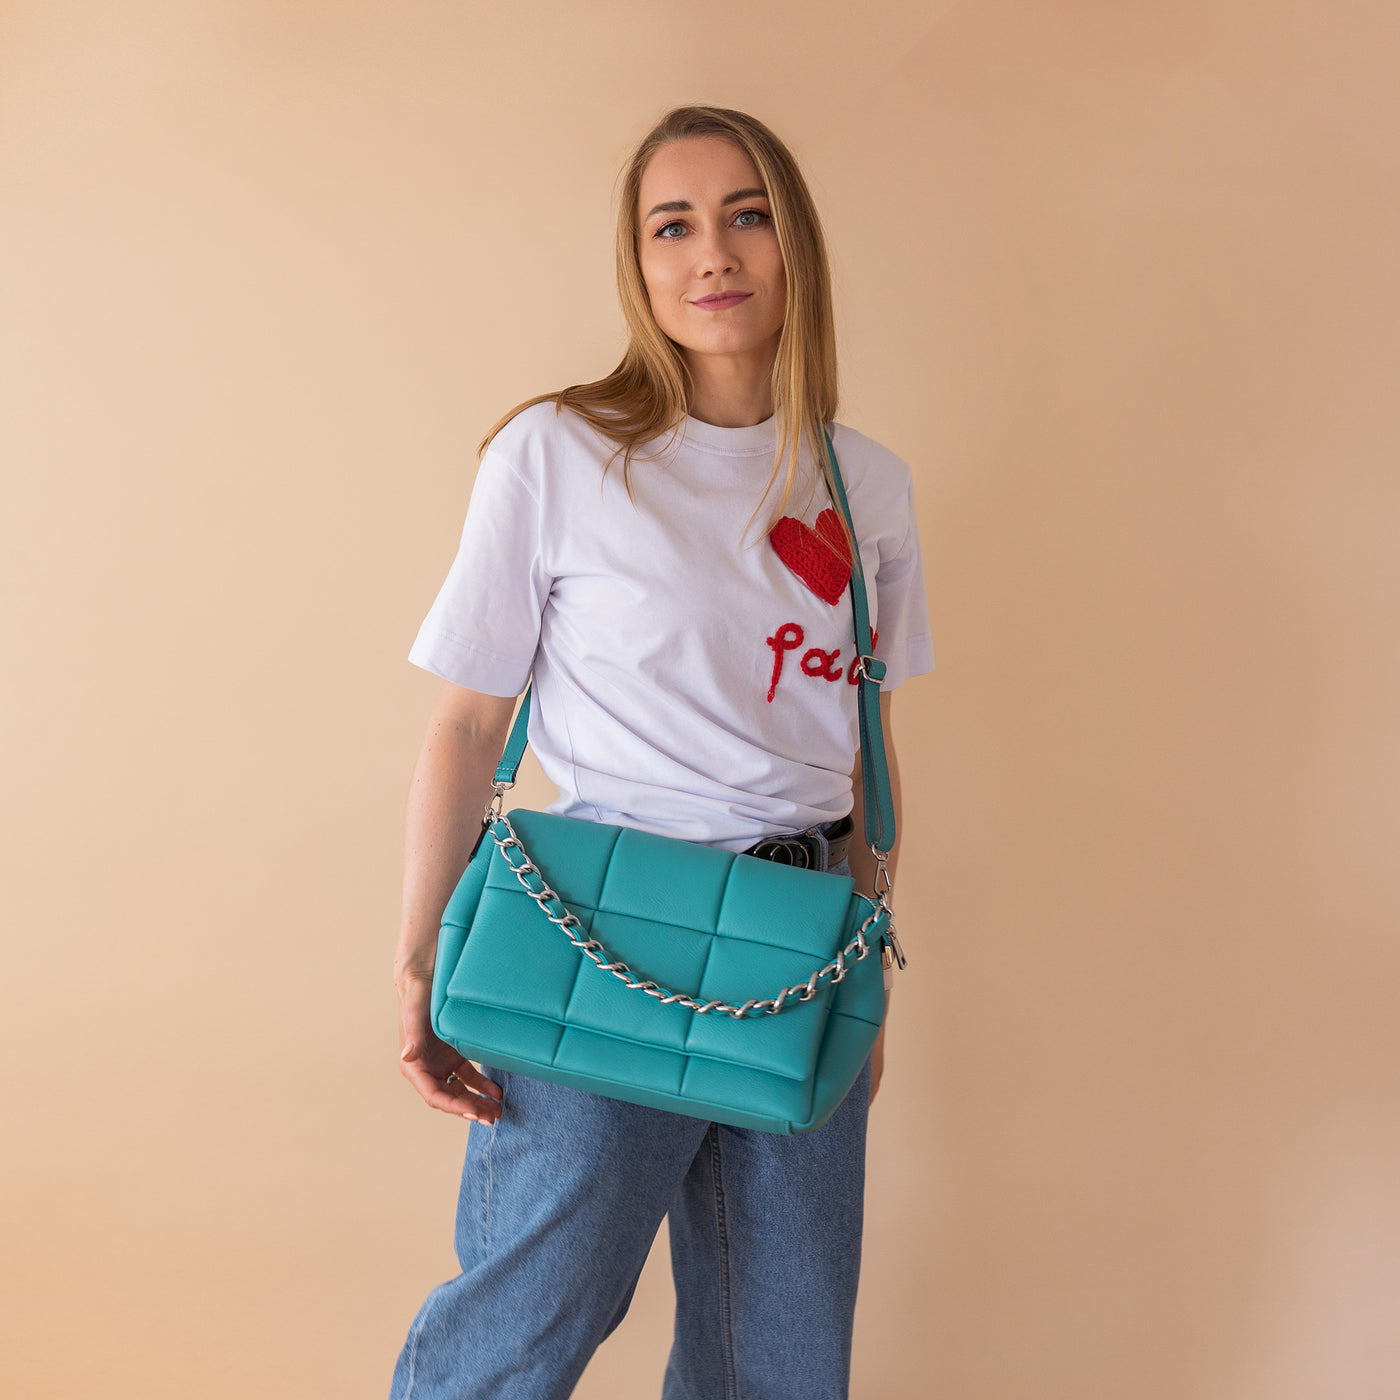 Leather bag "Spice" Large, Turquoise